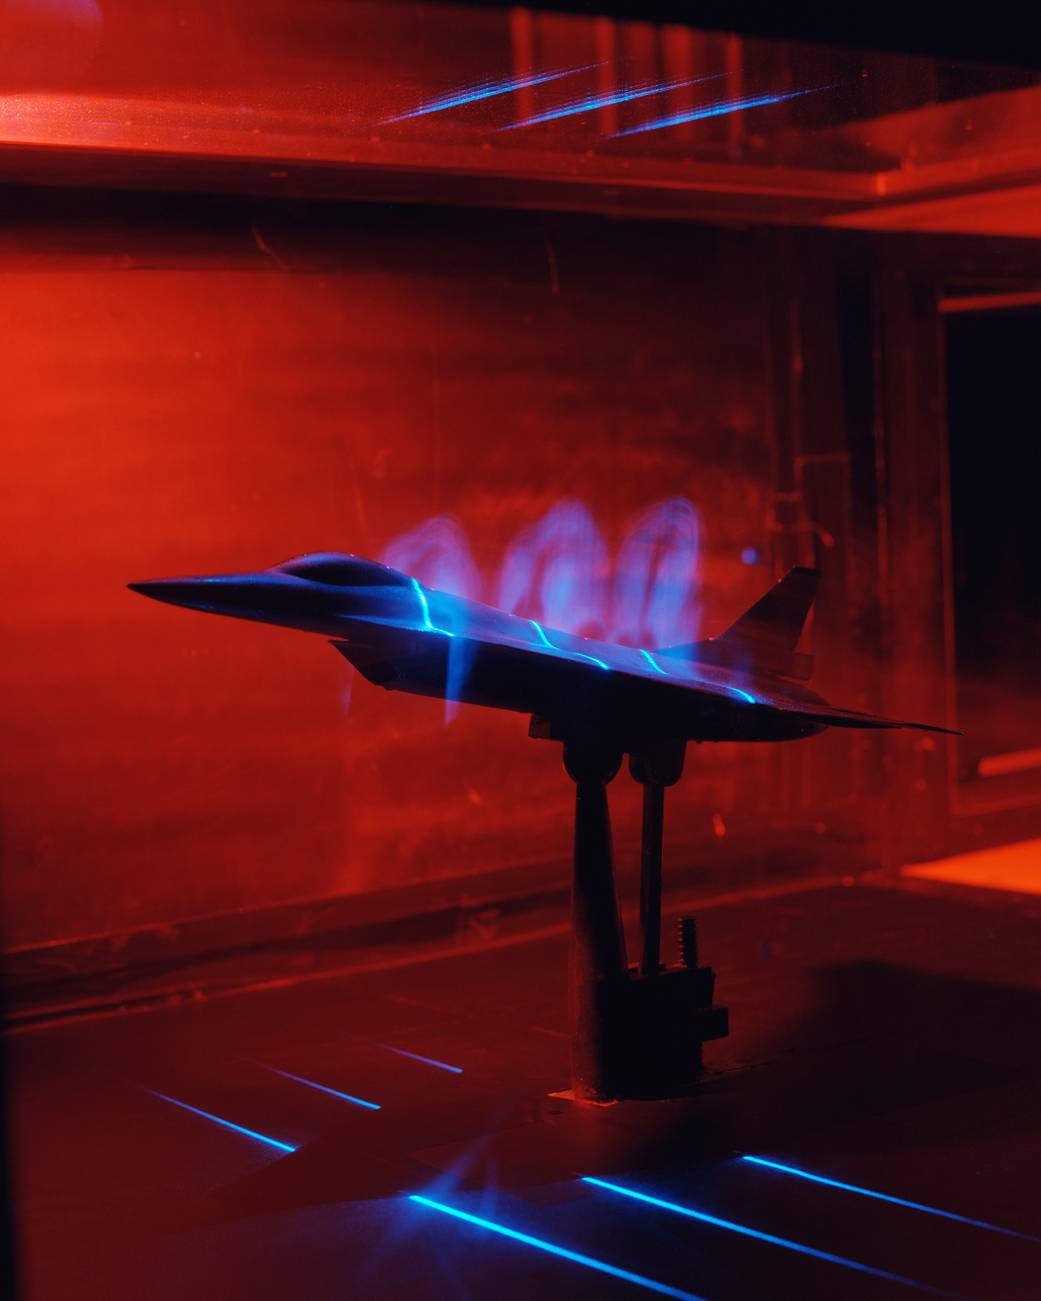 Model F-16 aircraft inside red wind tunnel with blue horizontal light beams shining from above